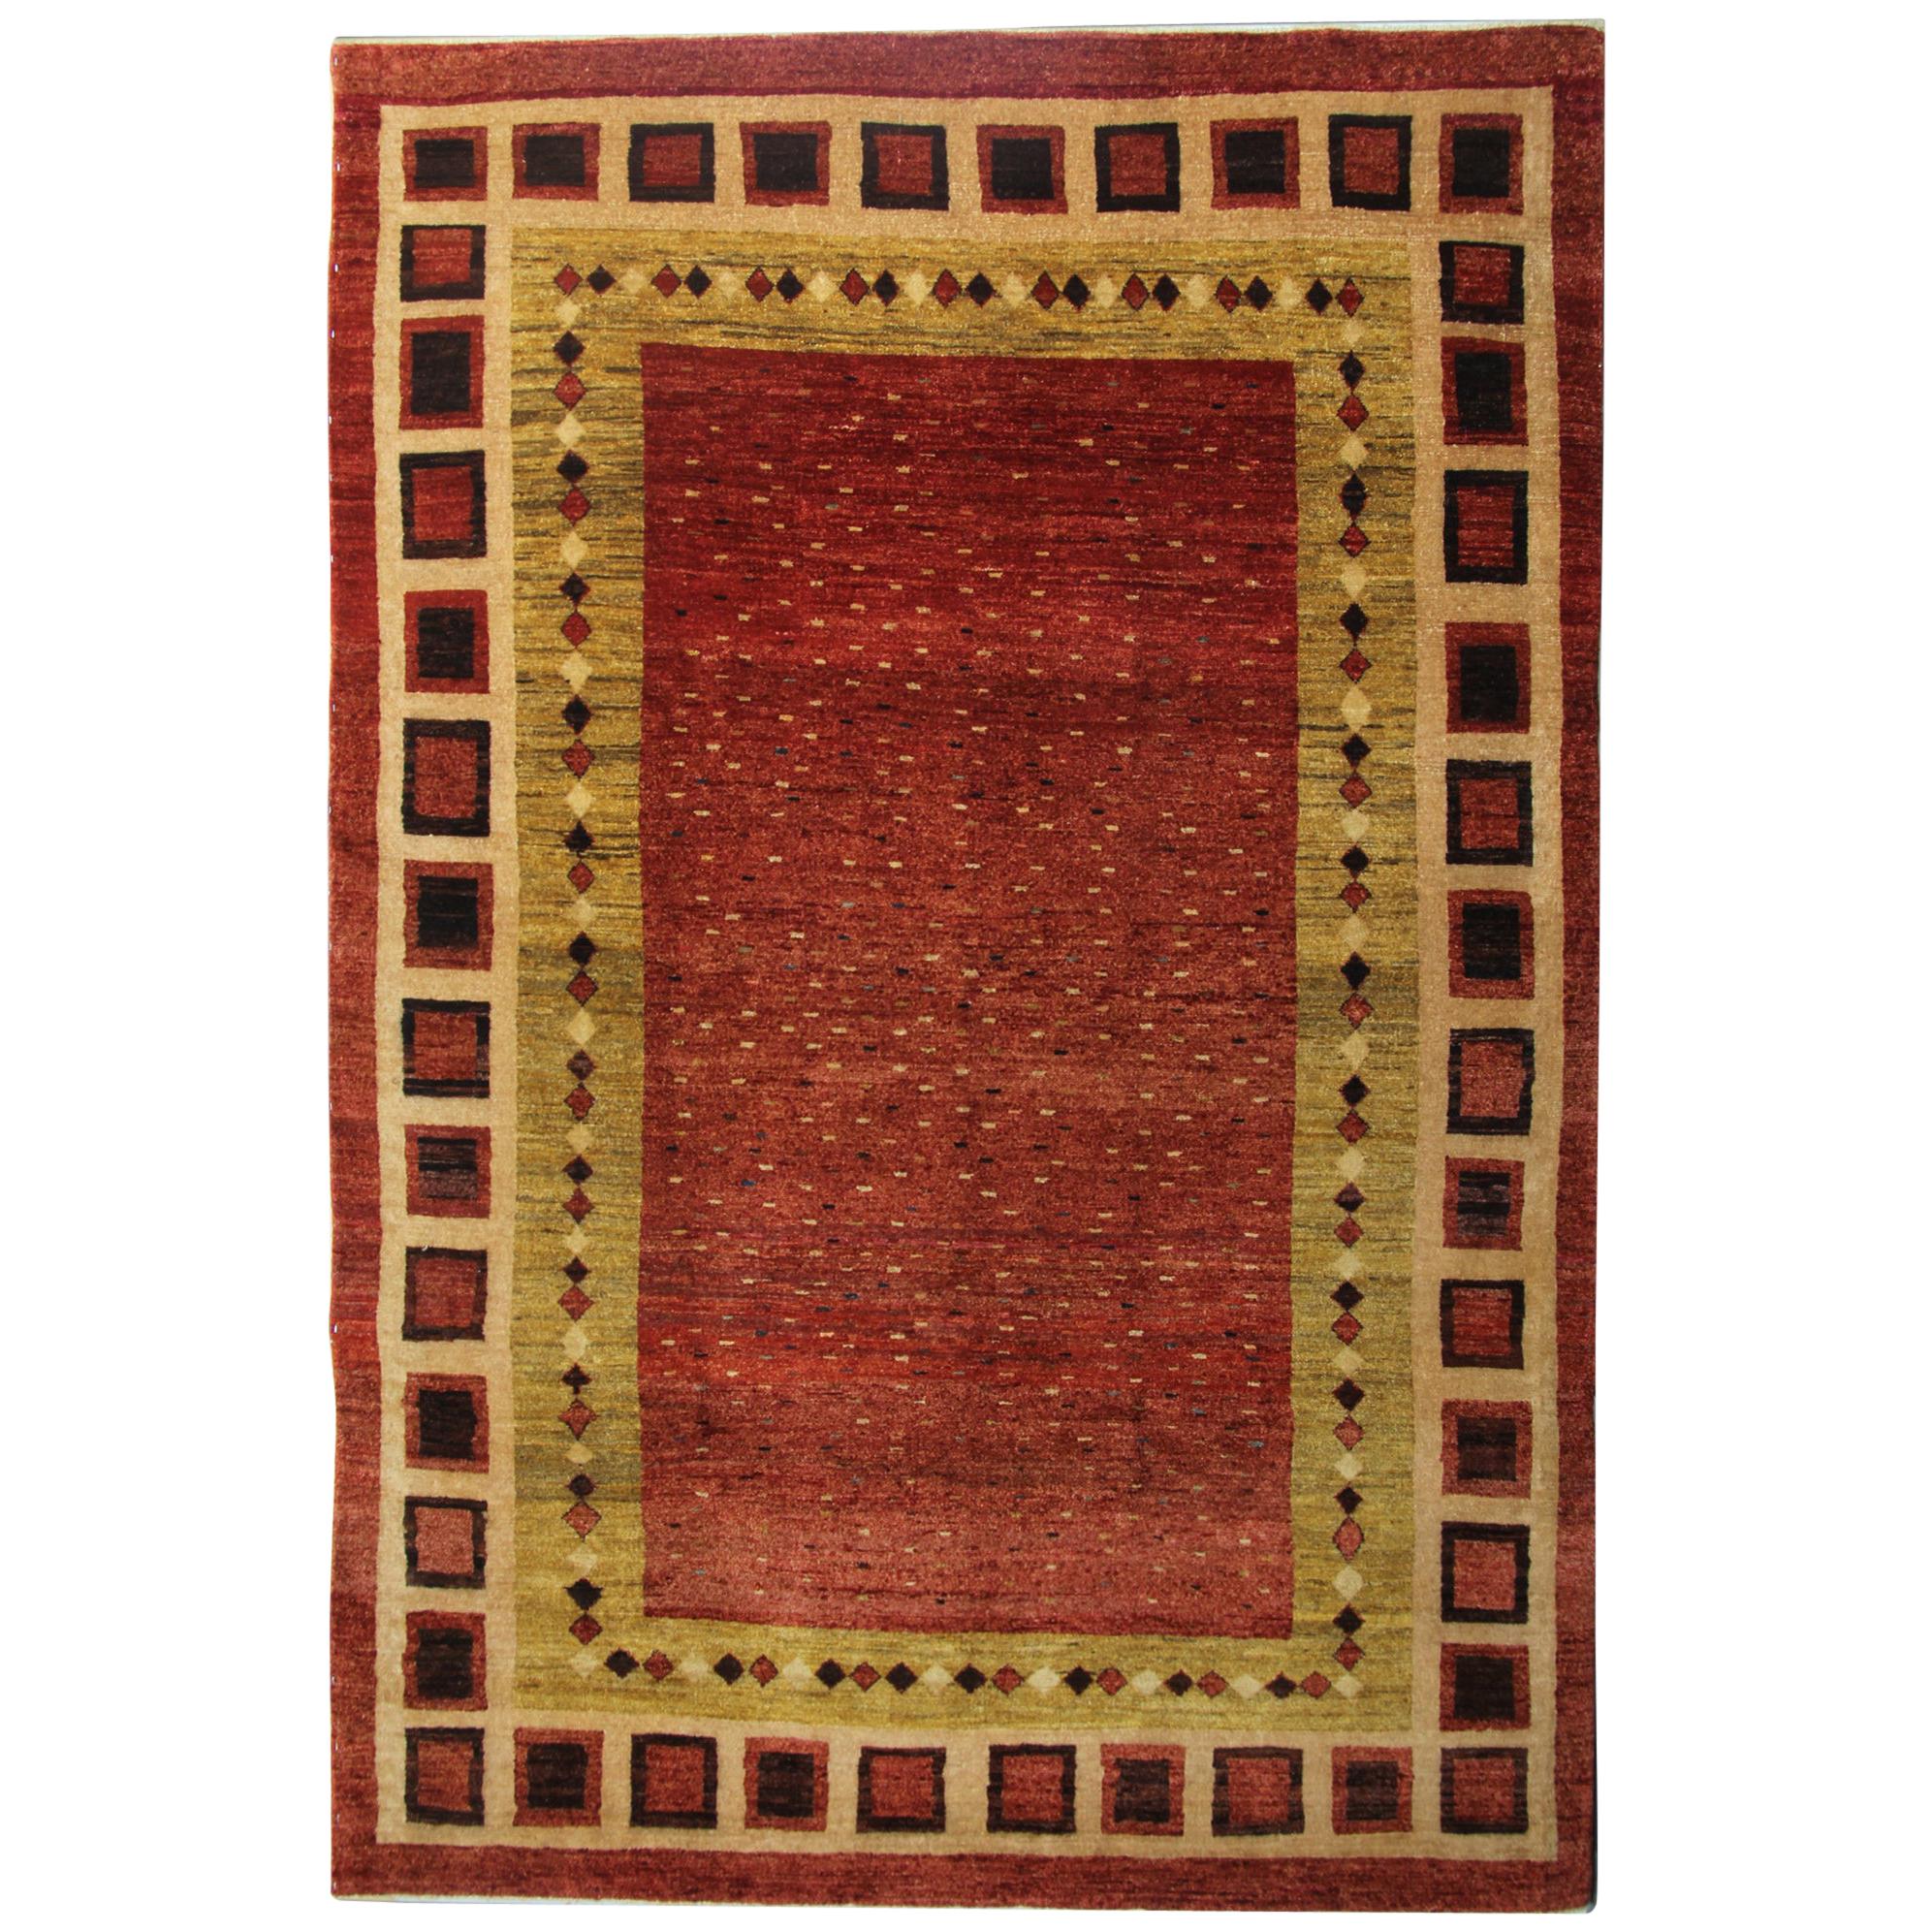 Contemporary Rugs, Handwoven Modern Rugs Carpet from Afghanistan